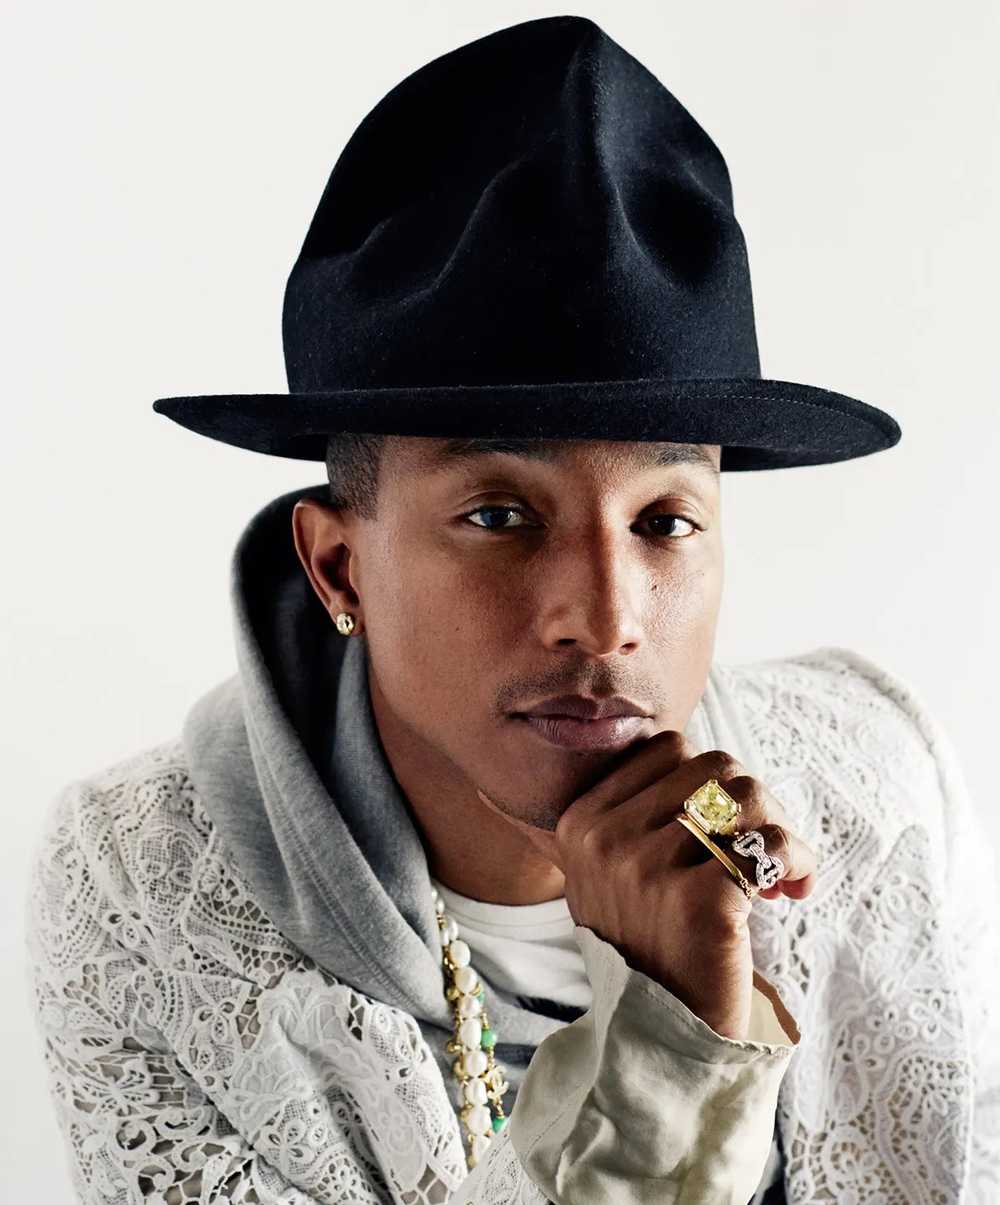 Japanese Brand - Sexy dynamite Pharell hats - image 1